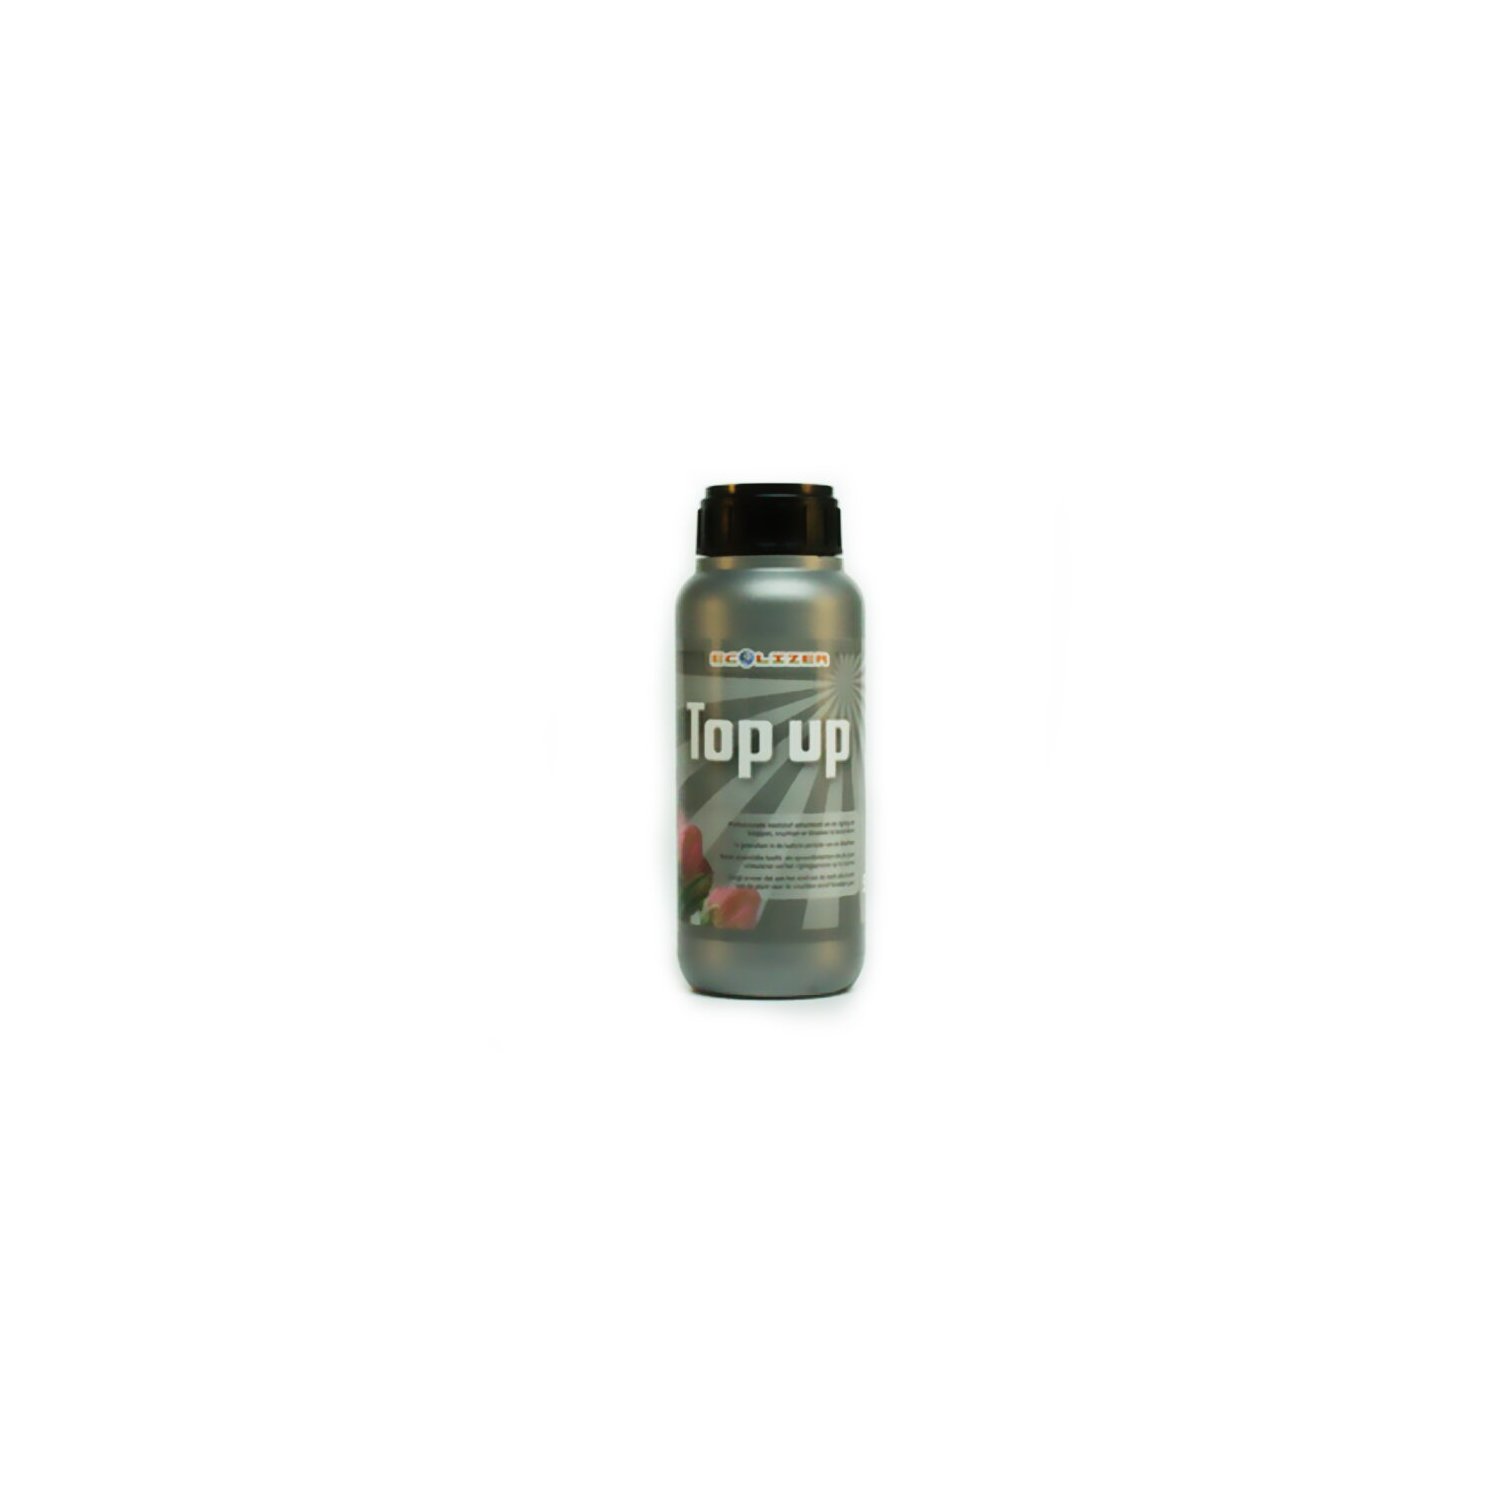 Ecolizer Top Up 500ml